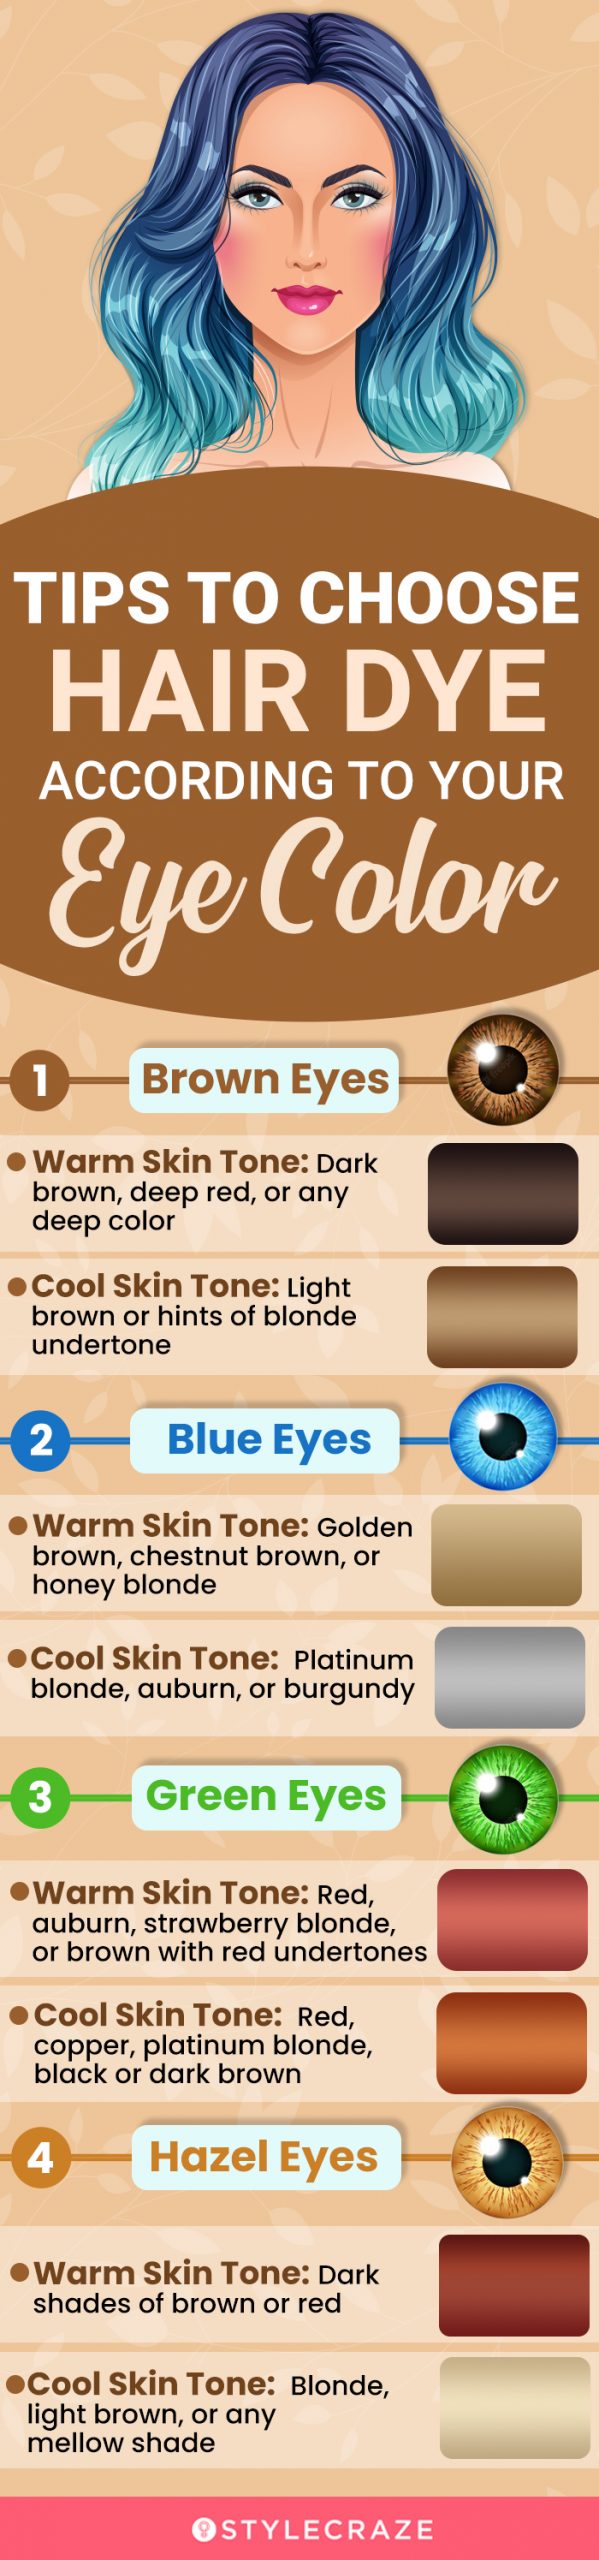 tips to choose hair dye according to your eye color (infographic)